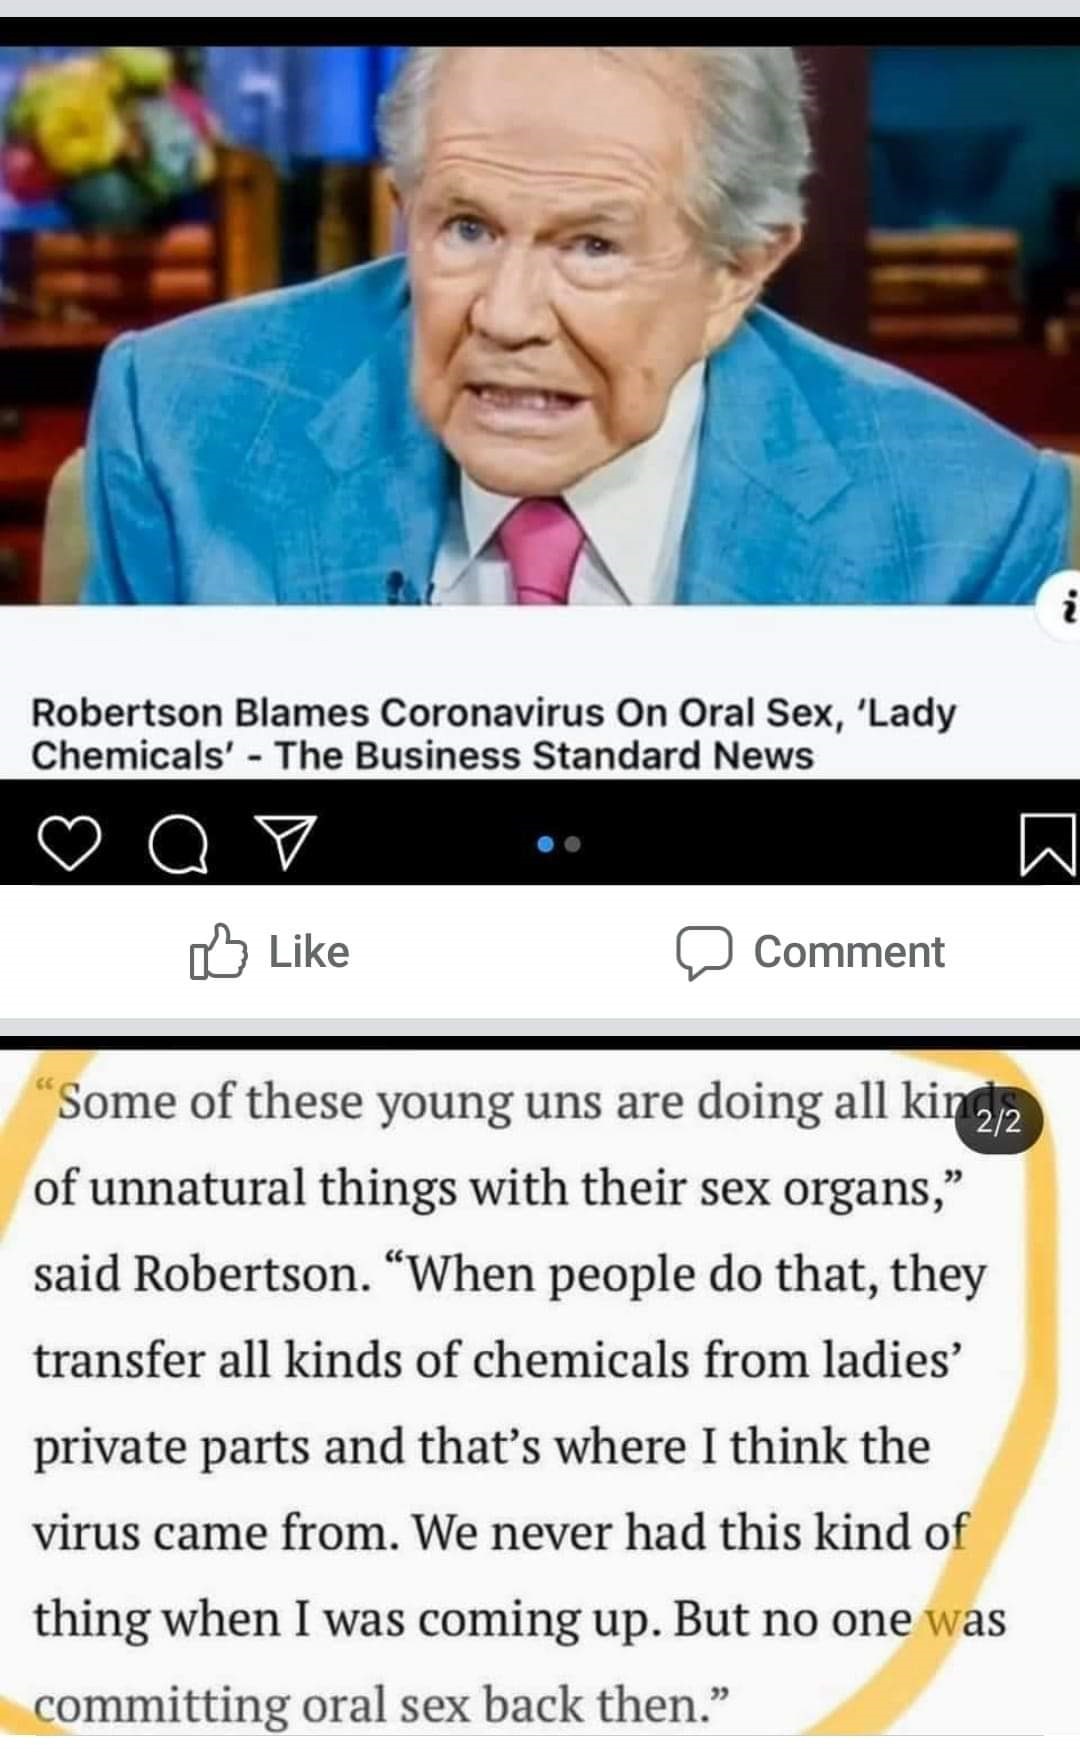 pat robertson - Robertson Blames Coronavirus On Oral Sex, 'Lady Chemicals' The Business Standard News ao D Comment "Some of these young uns are doing all kingia of unnatural things with their sex organs, said Robertson. When people do that, they transfer 